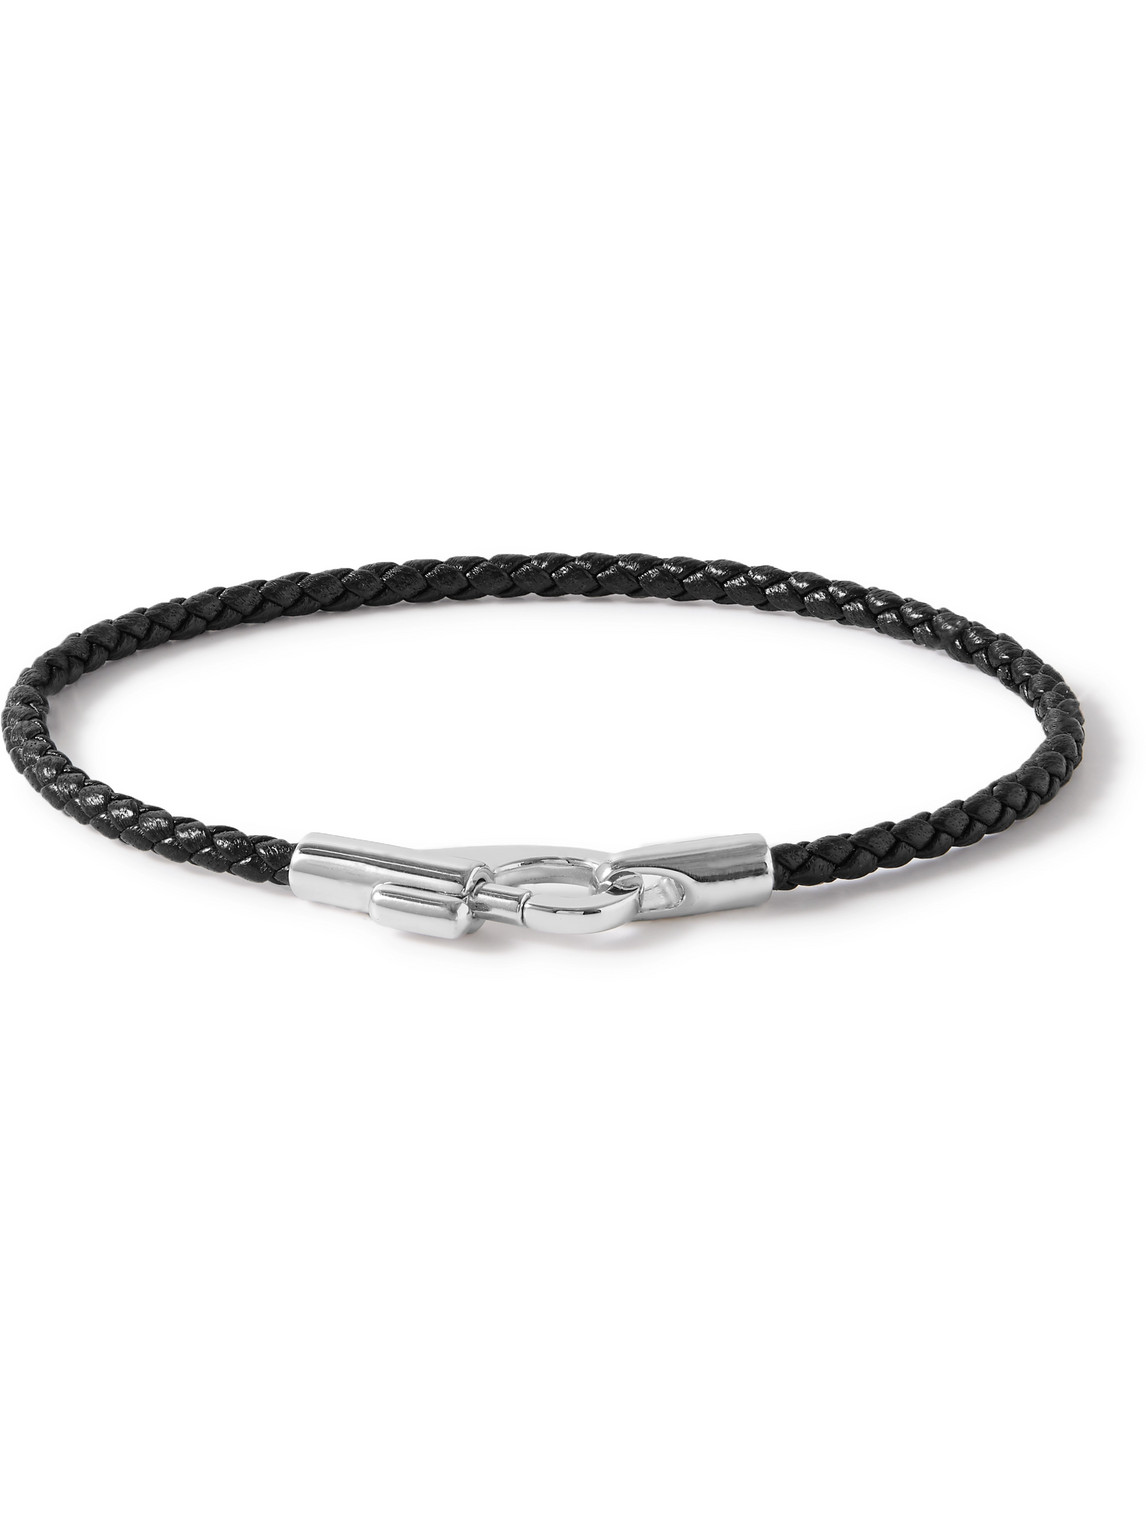 Rhodium-Plated Sterling Silver and Braided Leather Bracelet